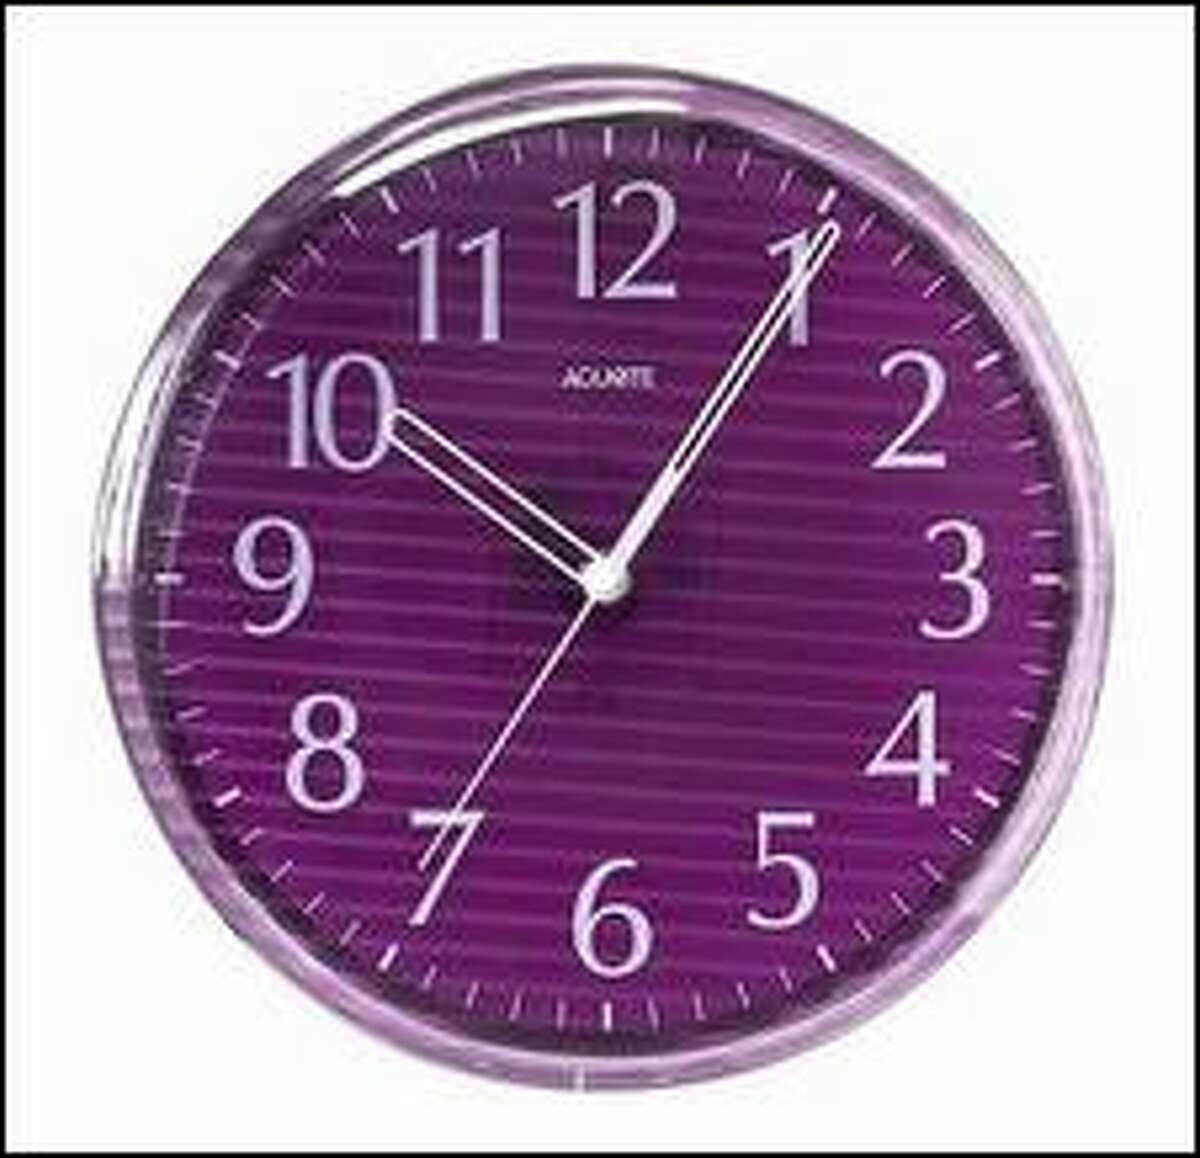 This clock sells for $28.85 at The Purple Store.